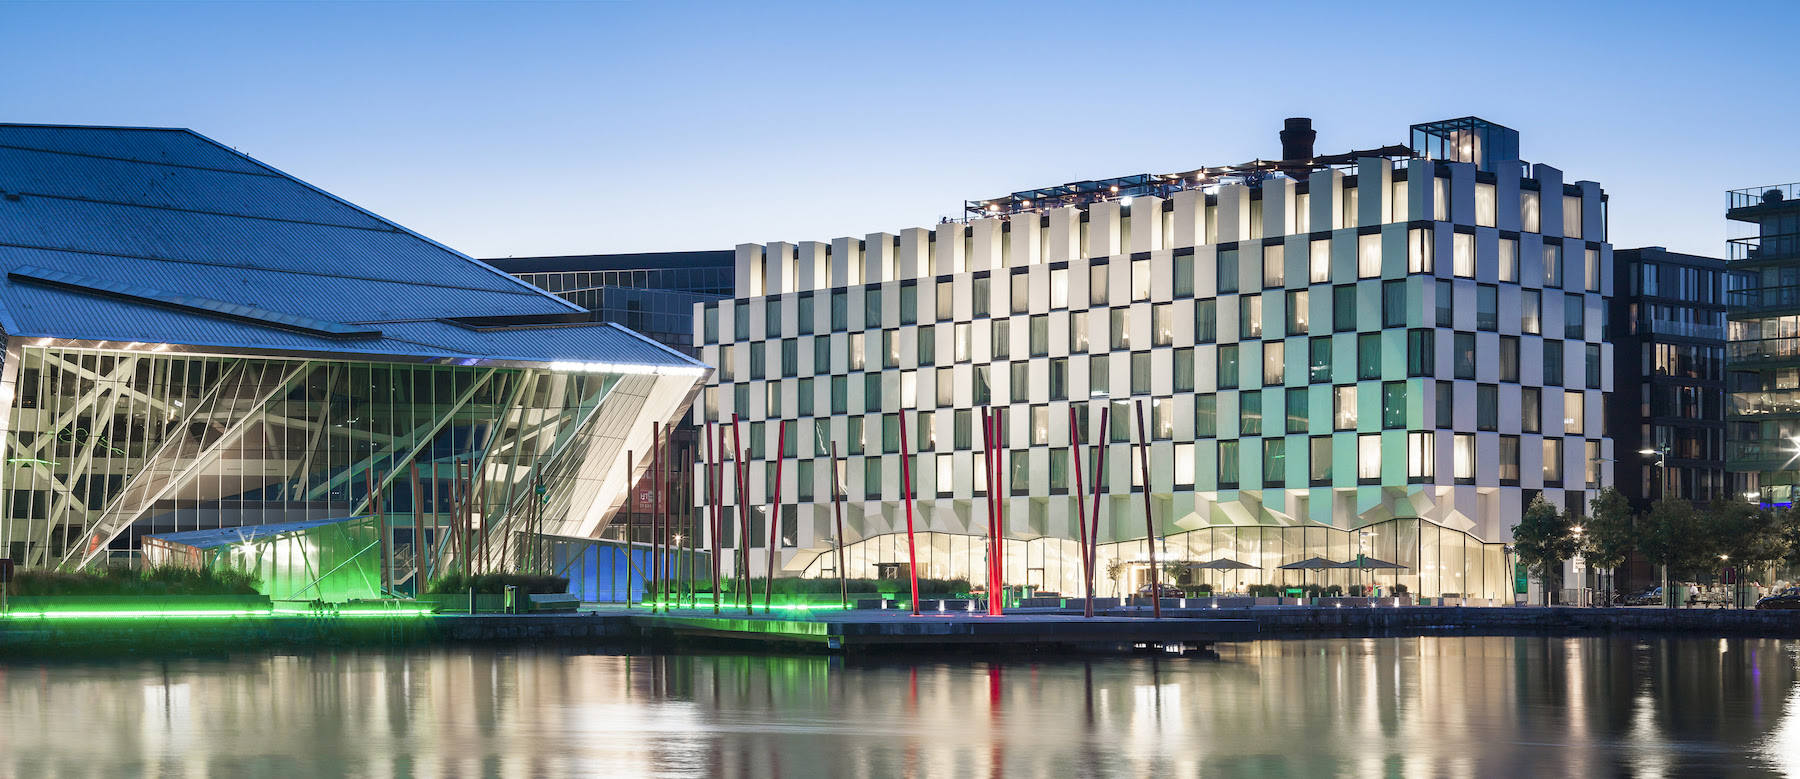 This newly-opened Dublin hotel is one of the most impressive buildings in the Irish capital